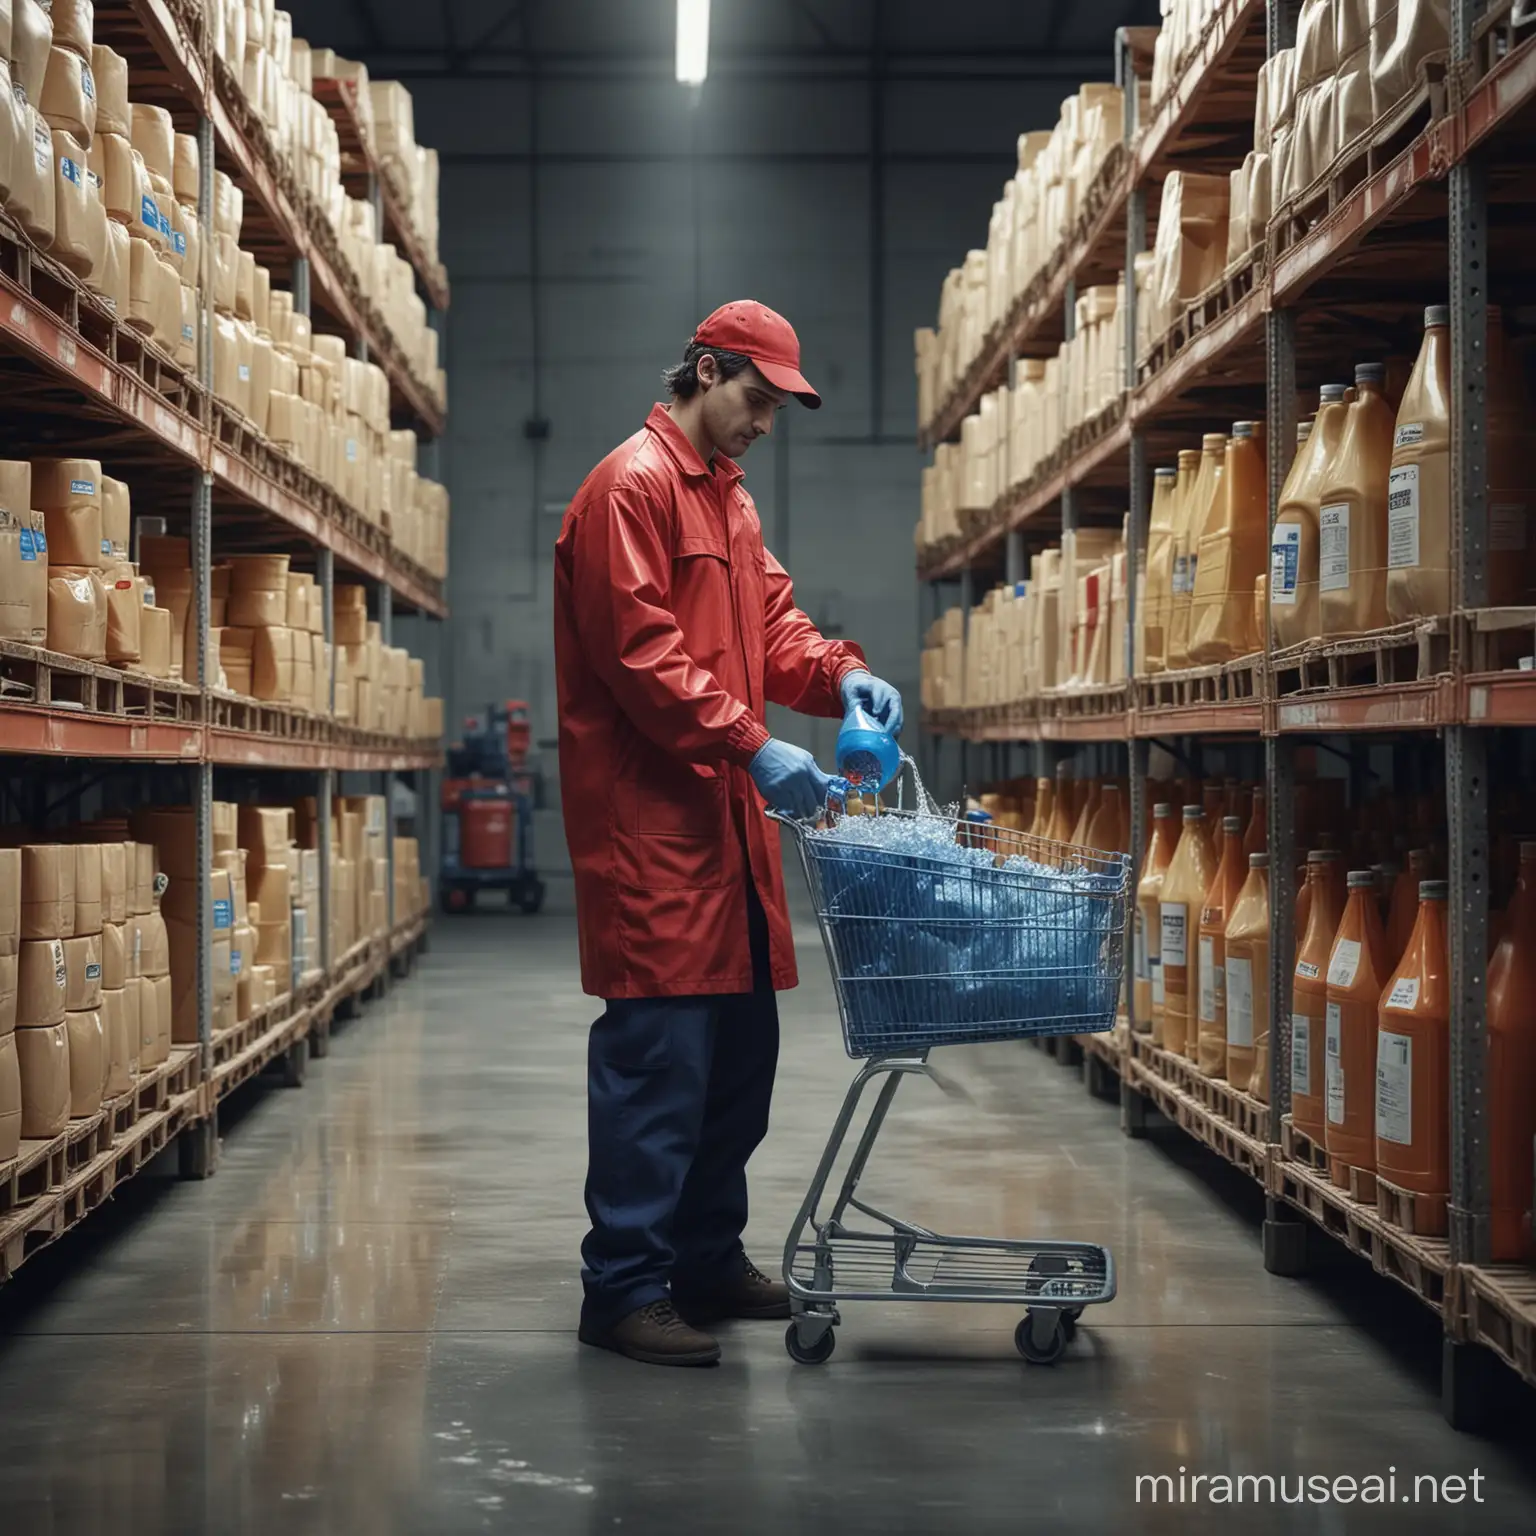 Warehouse Retail Worker Pouring Blue Liquid Over Food in Shopping Cart